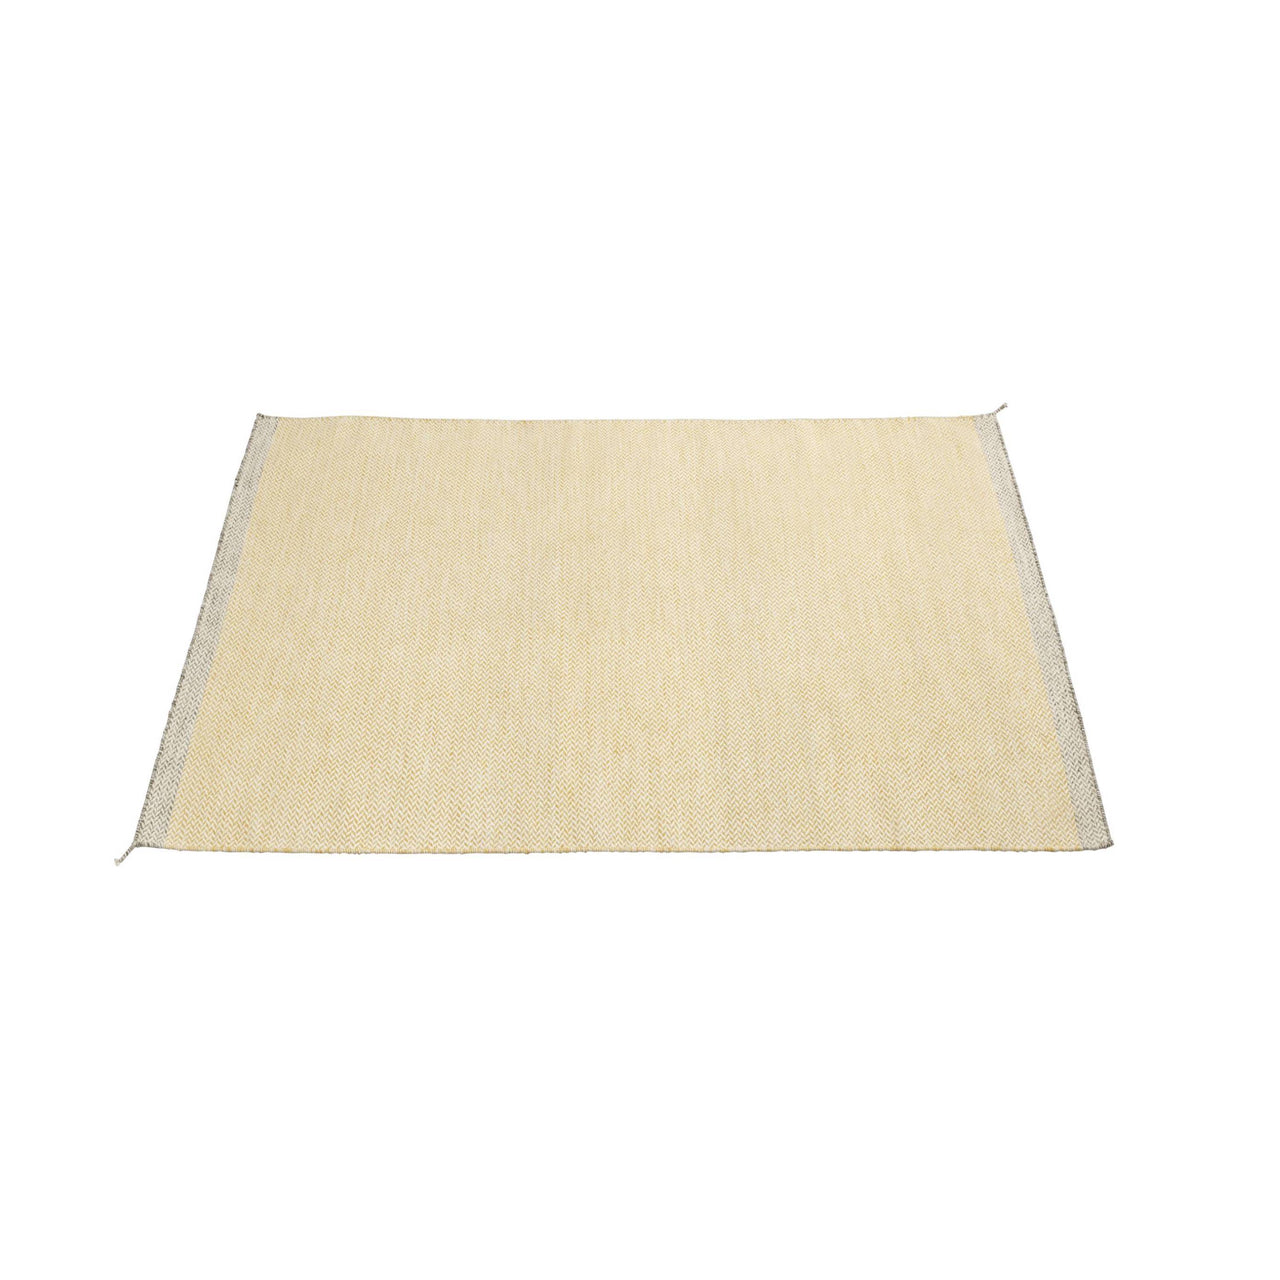 Ply Rug: Large - 118.1